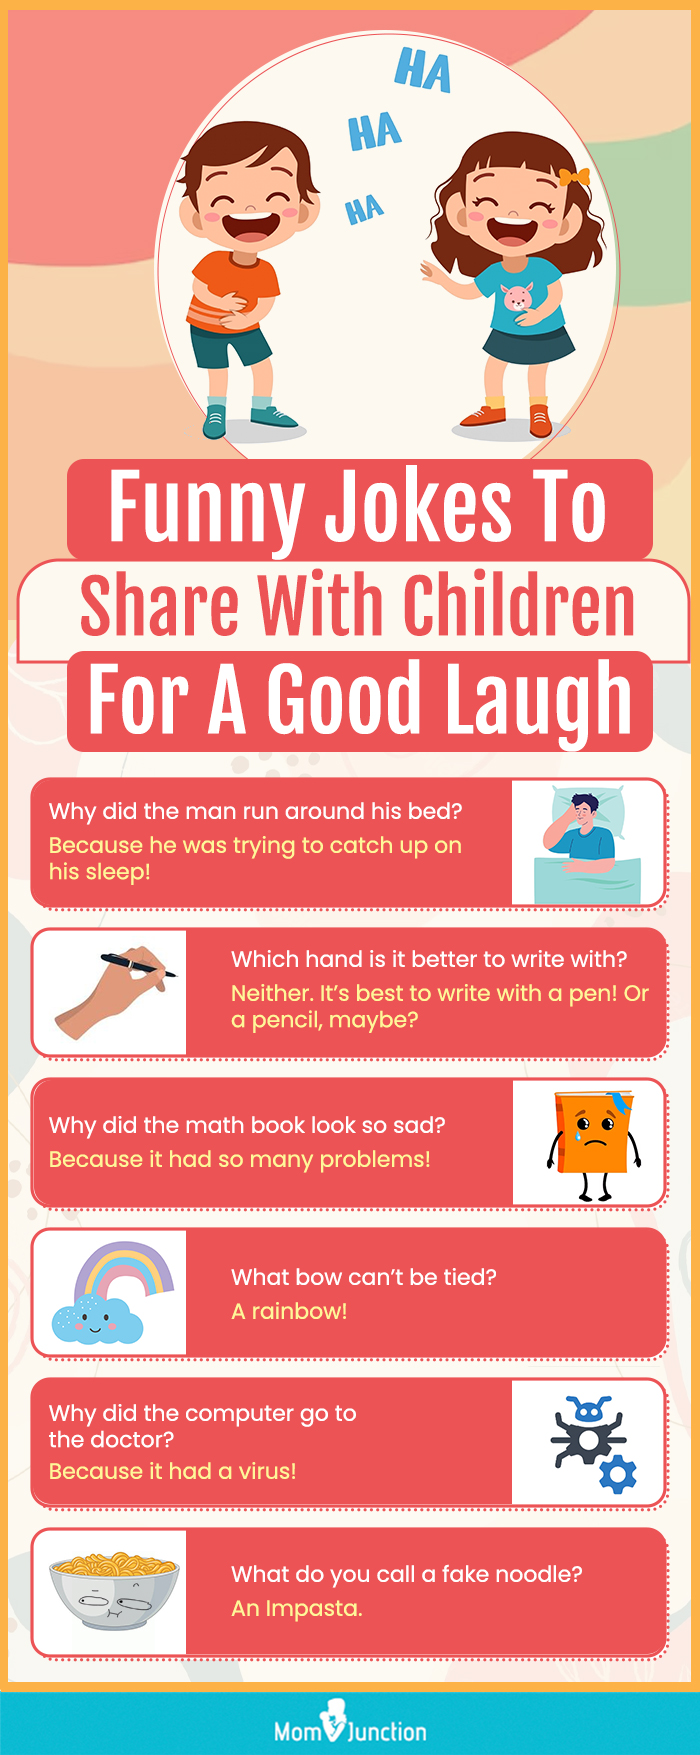 funny jokes to share with children for a good laugh (infographic)